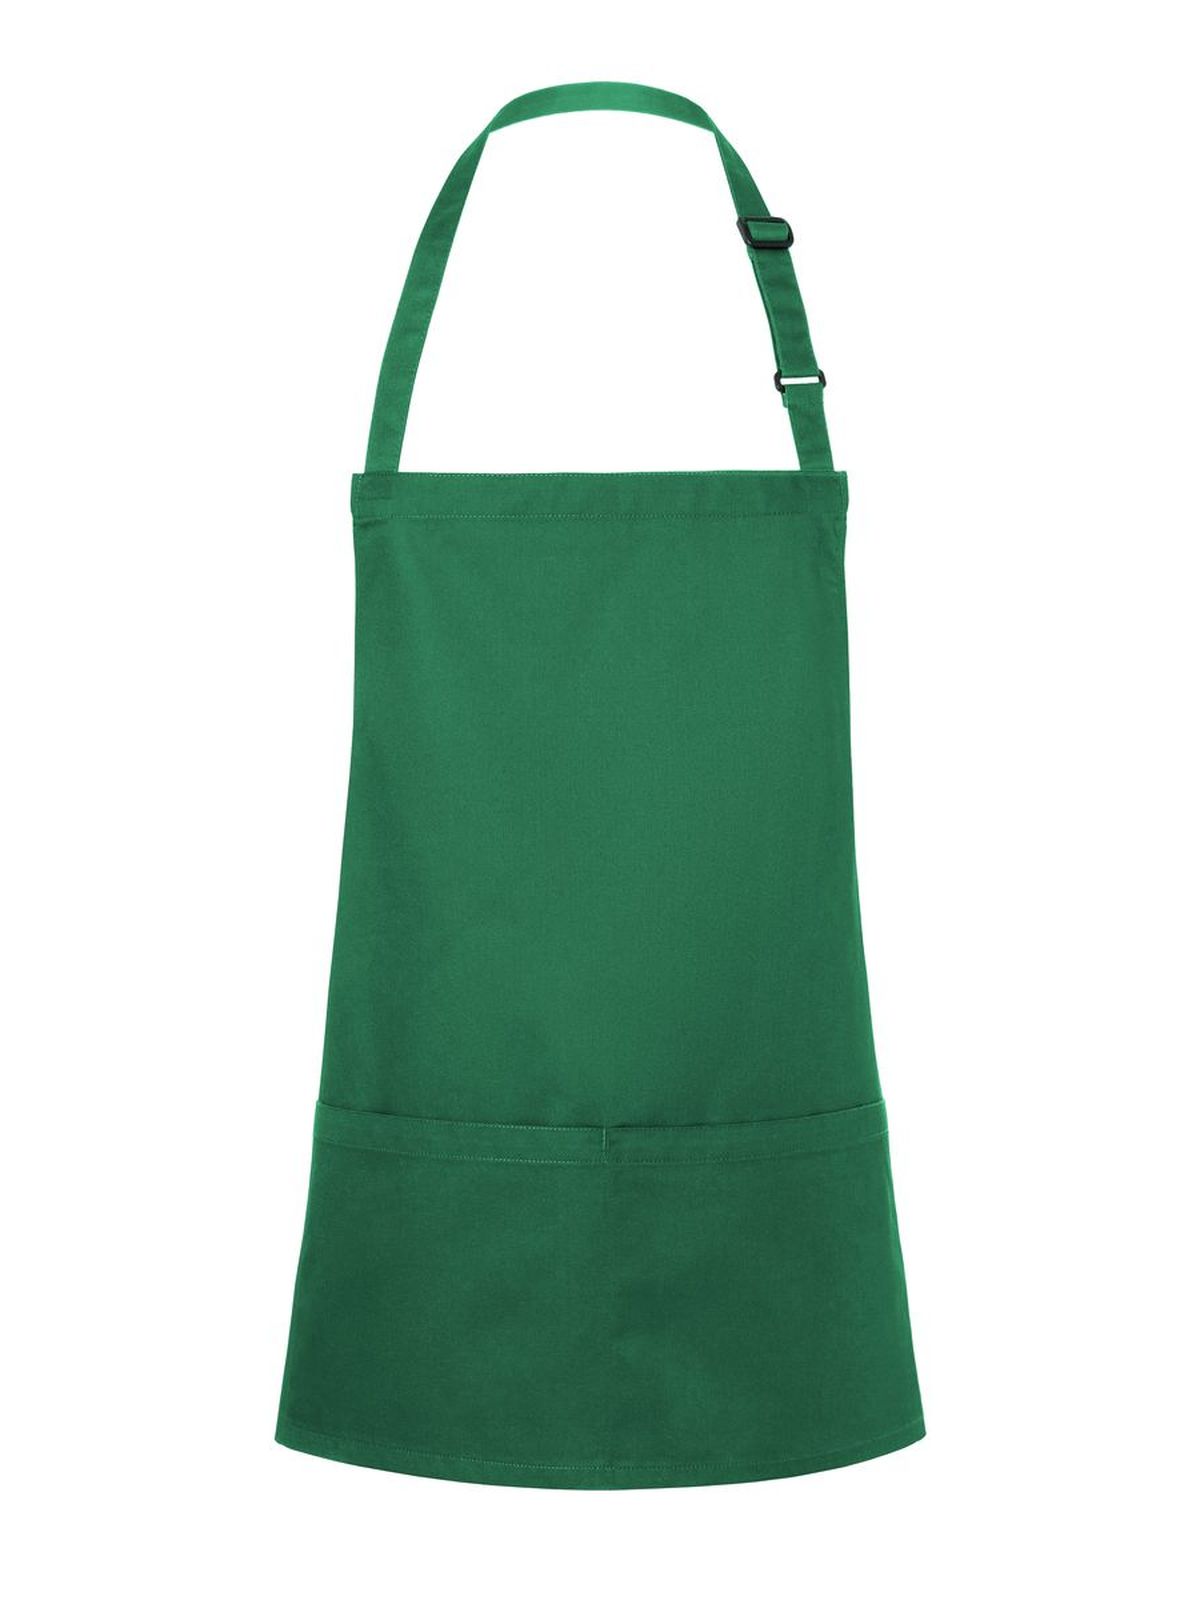 short-bib-apron-basic-with-buckle-and-pocket-0-forest-green.webp